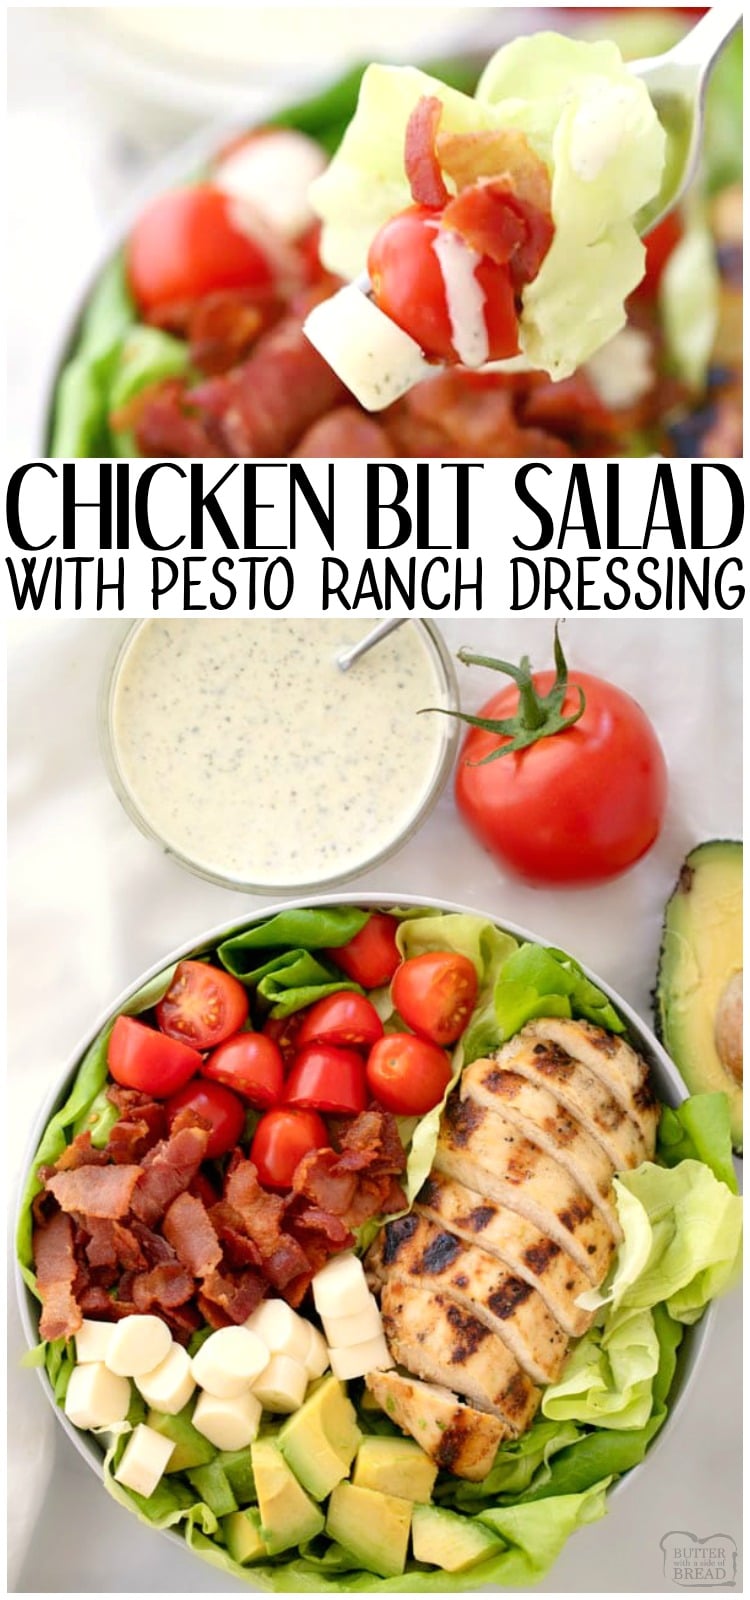 Grilled Chicken BLT Salad is an easy summer salad recipe filled with grilled marinated chicken, bacon, tomatoes, cheese and butter lettuce. Topped with a creamy pesto ranch dressing that's easy and flavorful, this salad is a huge hit!  #BLT #chicken #salad #ranch #recipe from Butter With a Side of Bread